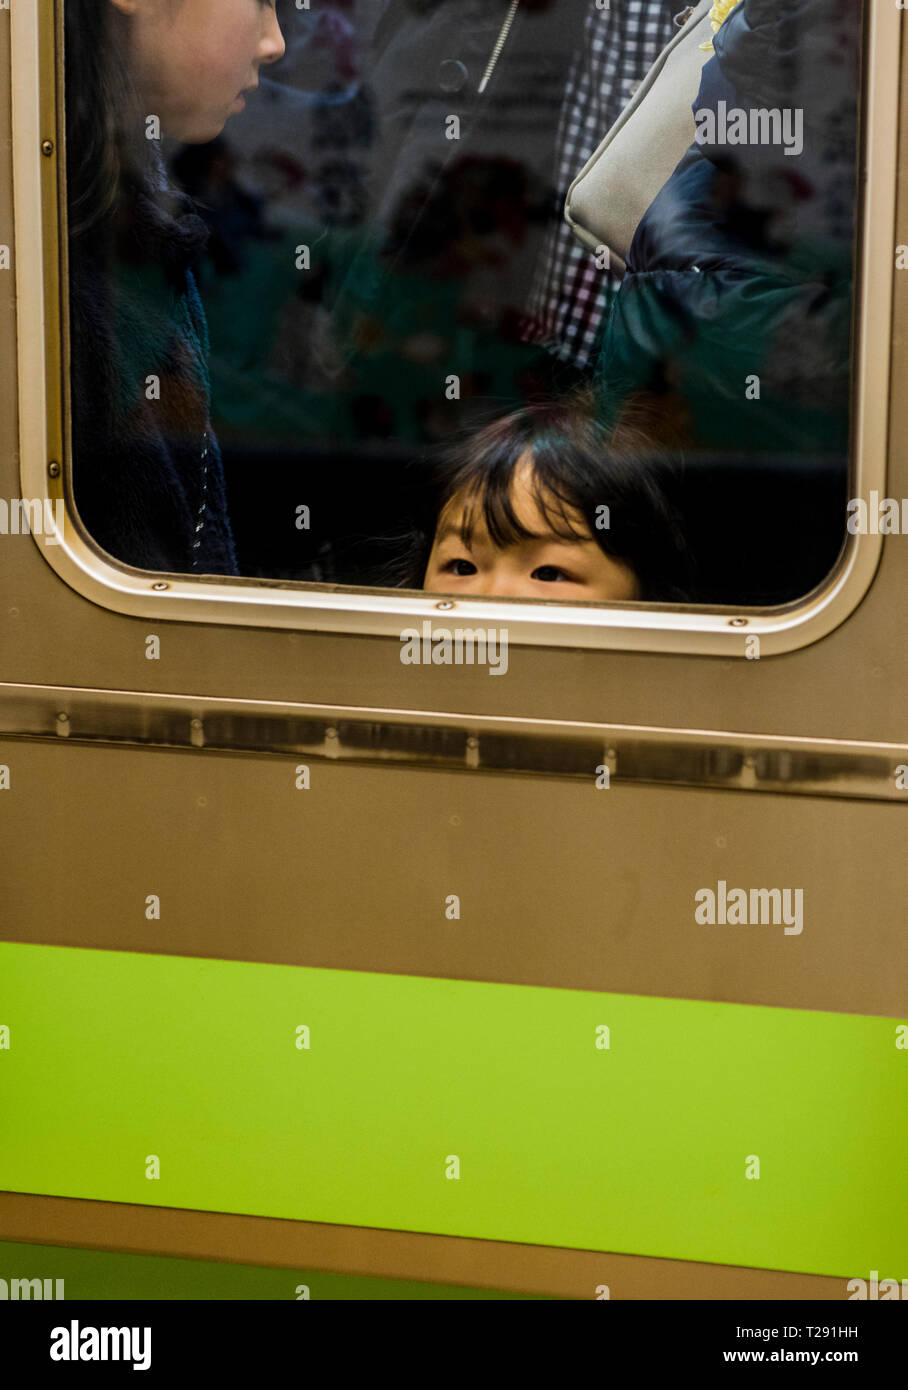 Young girl peering out of busy train window, Tokyo, Japan Stock Photo